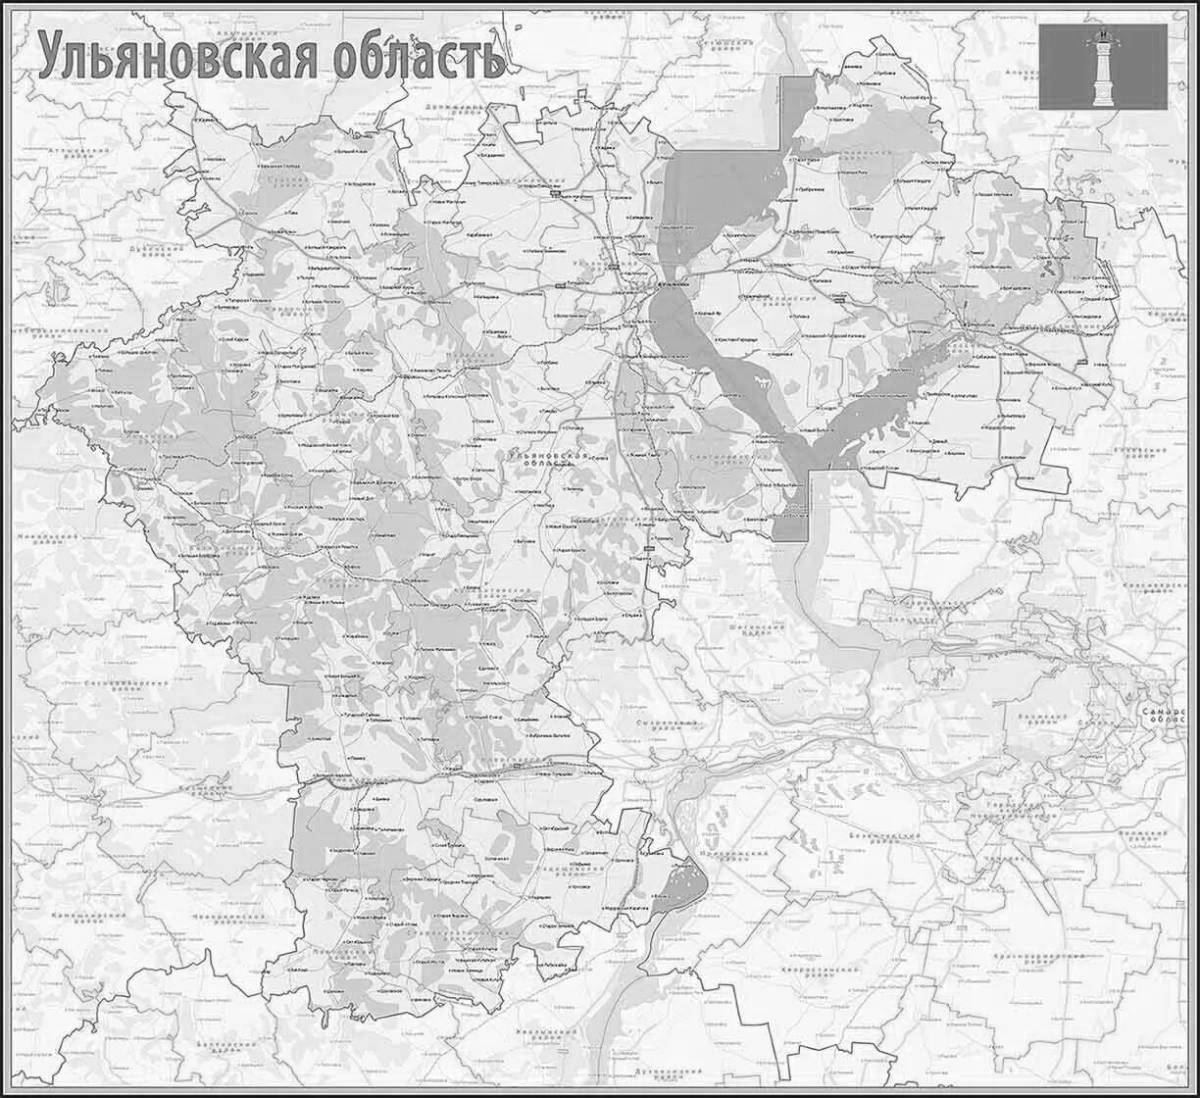 A fascinating map of the Ulyanovsk region